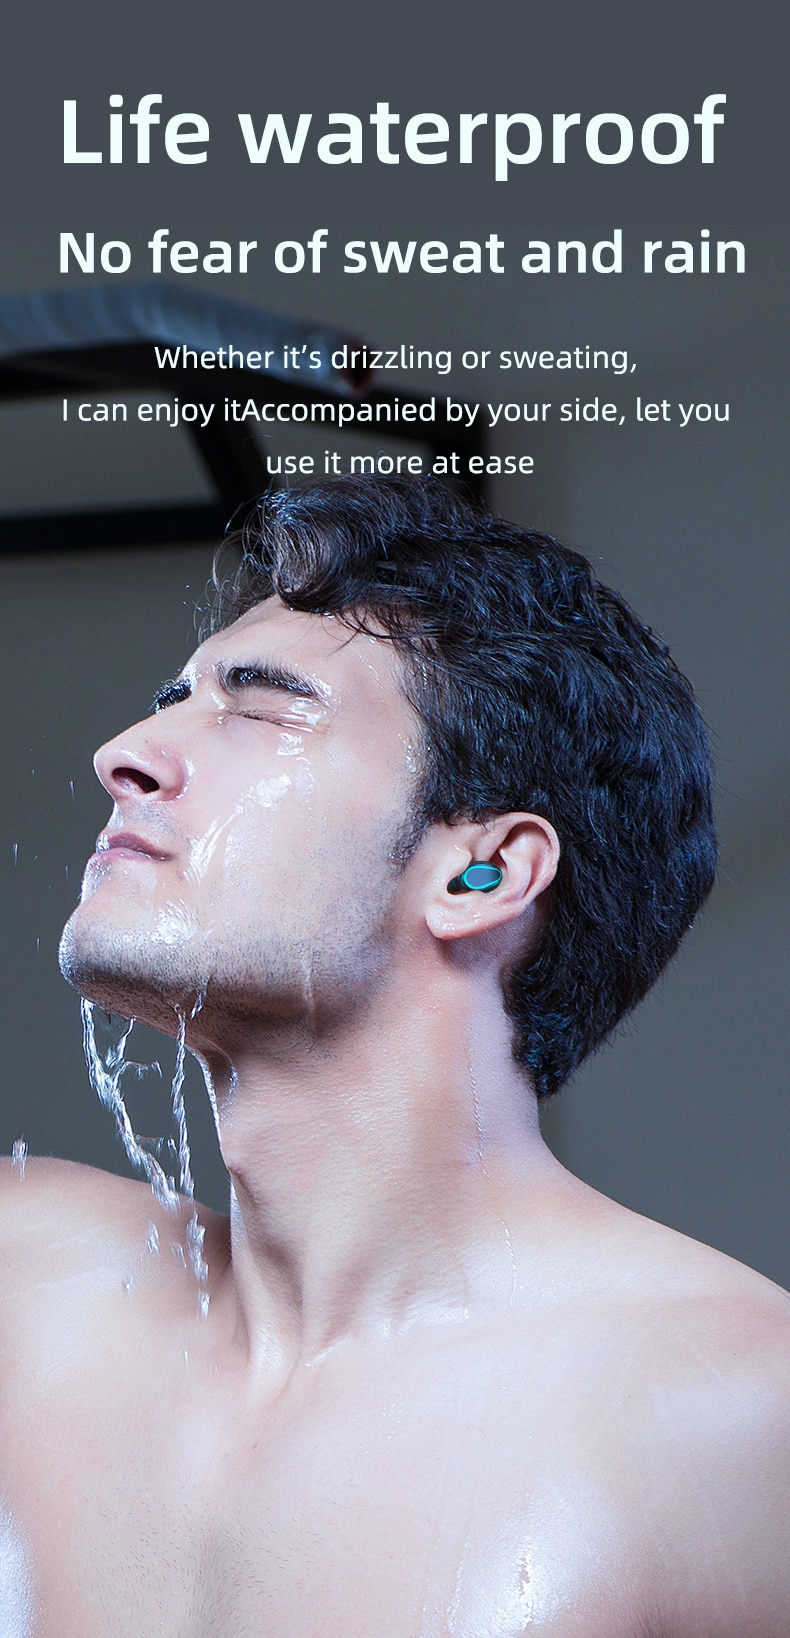 TWS-Bluetooth-Earphones-with-6000mAh-Charging-Case-Touch-Control-Wireless-Headphones-Headsets-9D-HiF-1005002352634494